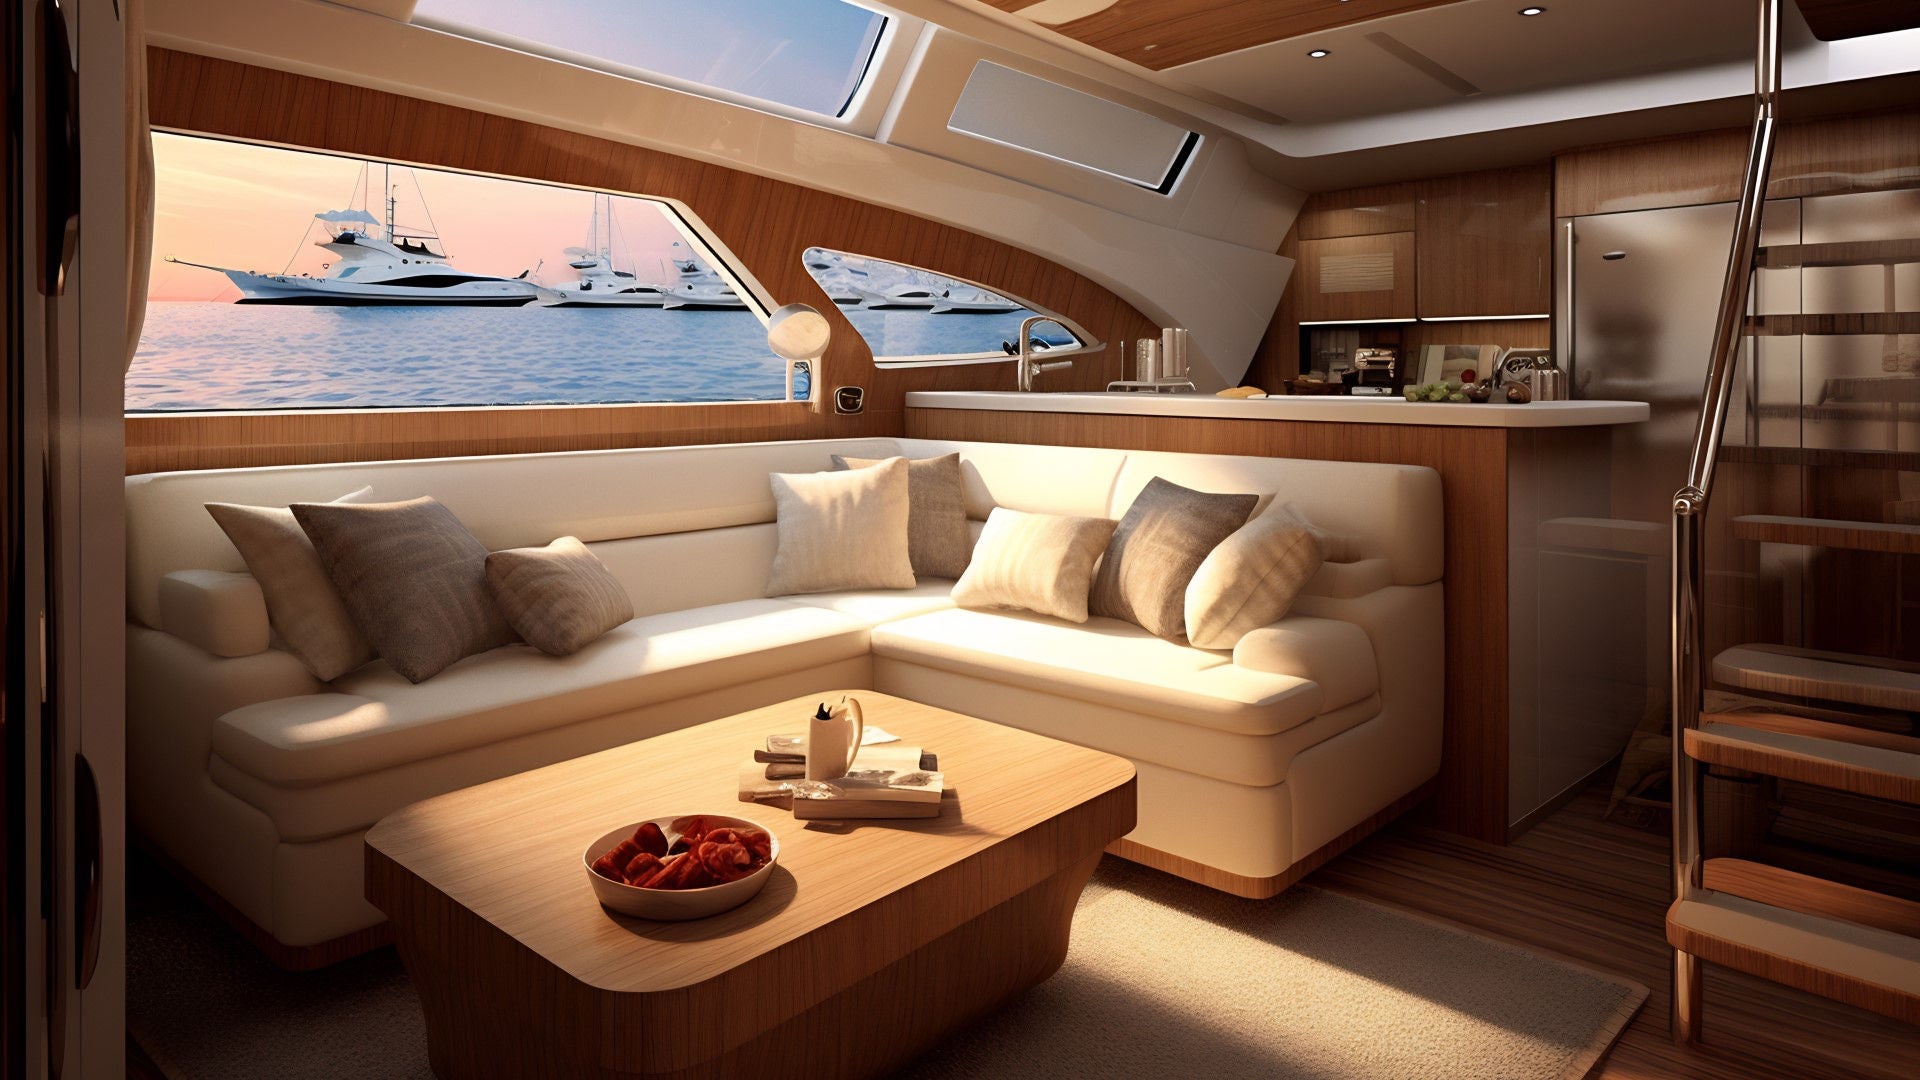 Seating area in a yacht